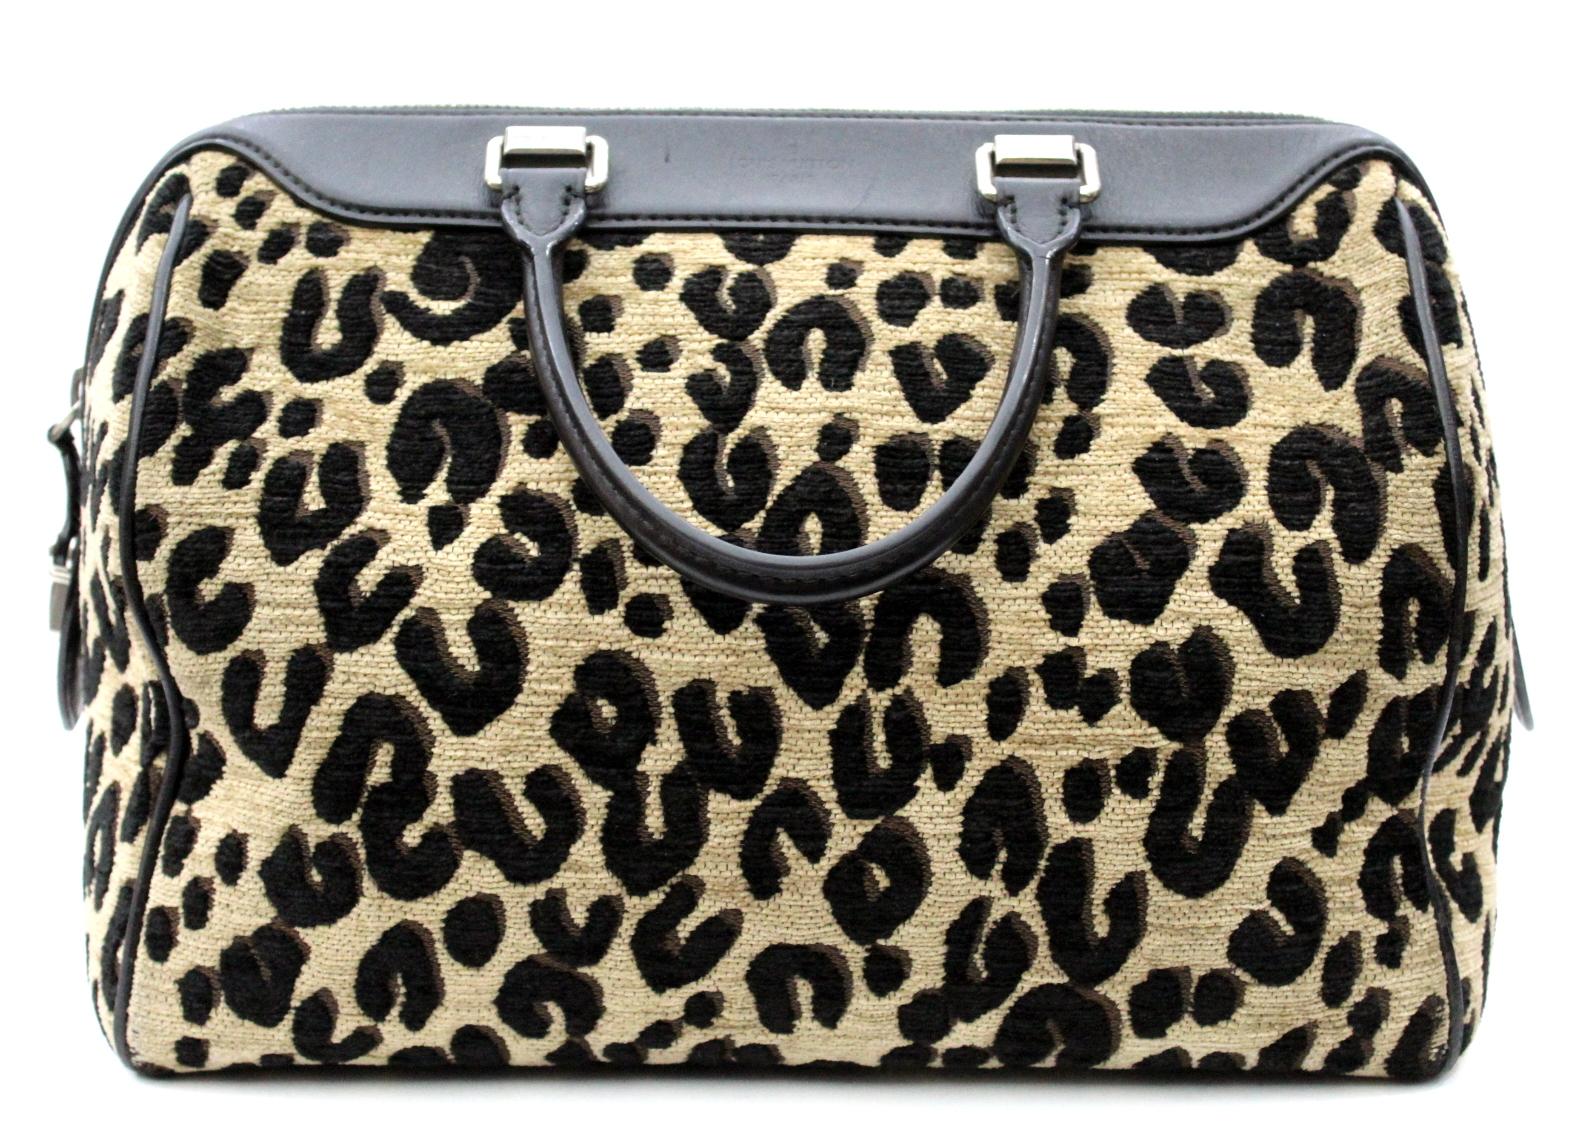 Inspired by the vintage glamour of train travel from years gone by, the 2012-2013 Fall/Winter runway collection had exotic shapes, luxurious leather and bold patterns. This stunning Leopard Speedy features an structured Speedy shape with gorgeous